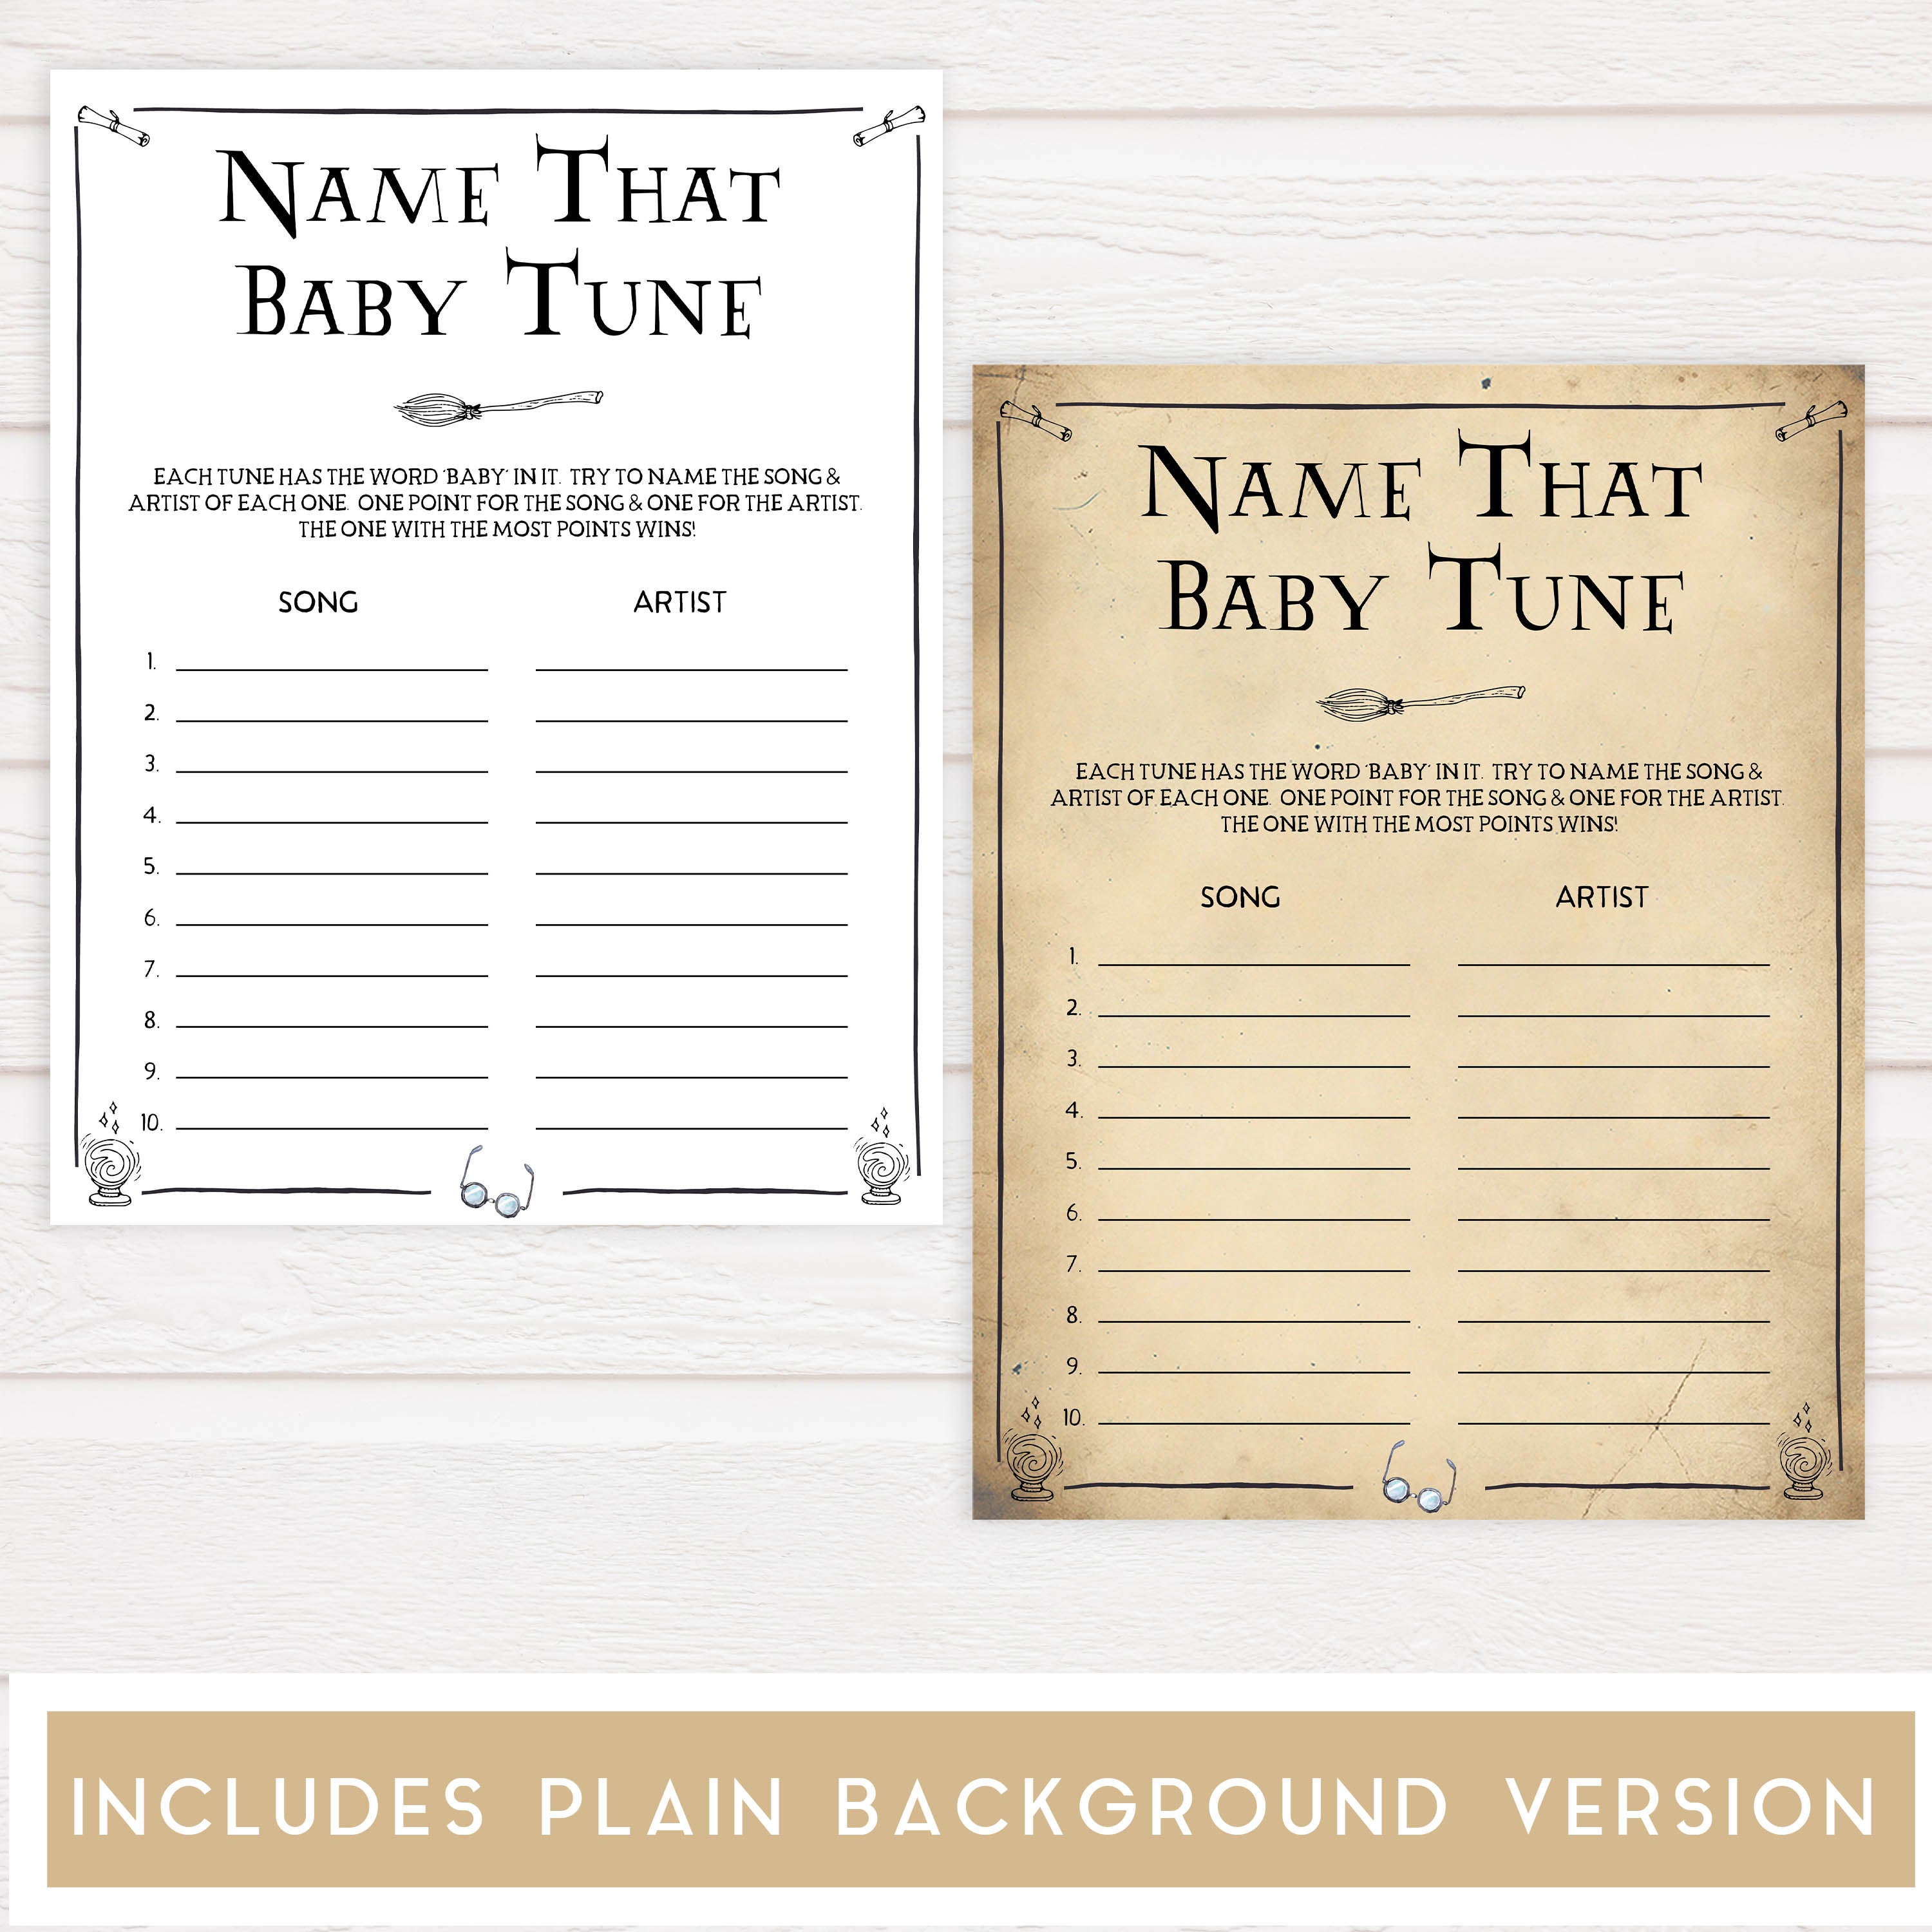 Name That Baby Tune Game, Wizard baby shower games, printable baby shower games, Harry Potter baby games, Harry Potter baby shower, fun baby shower games,  fun baby ideas